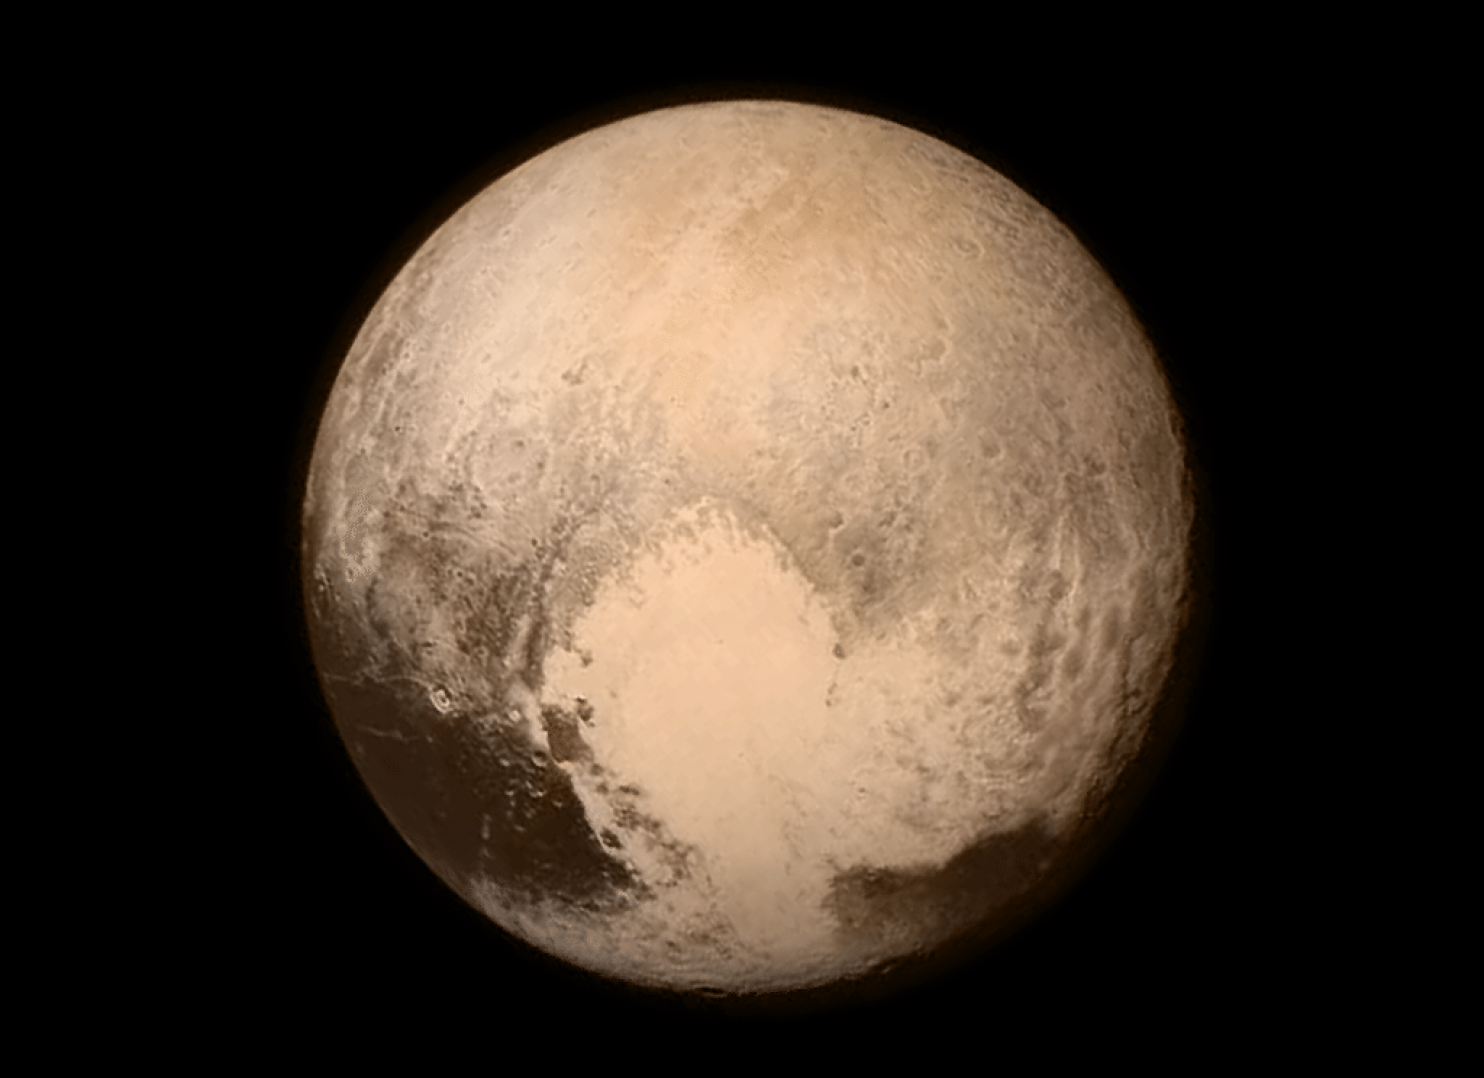 Pluto lost its planet status in 2006, a decision that was rushed through at an international conference and left some astronomers feeling isolated